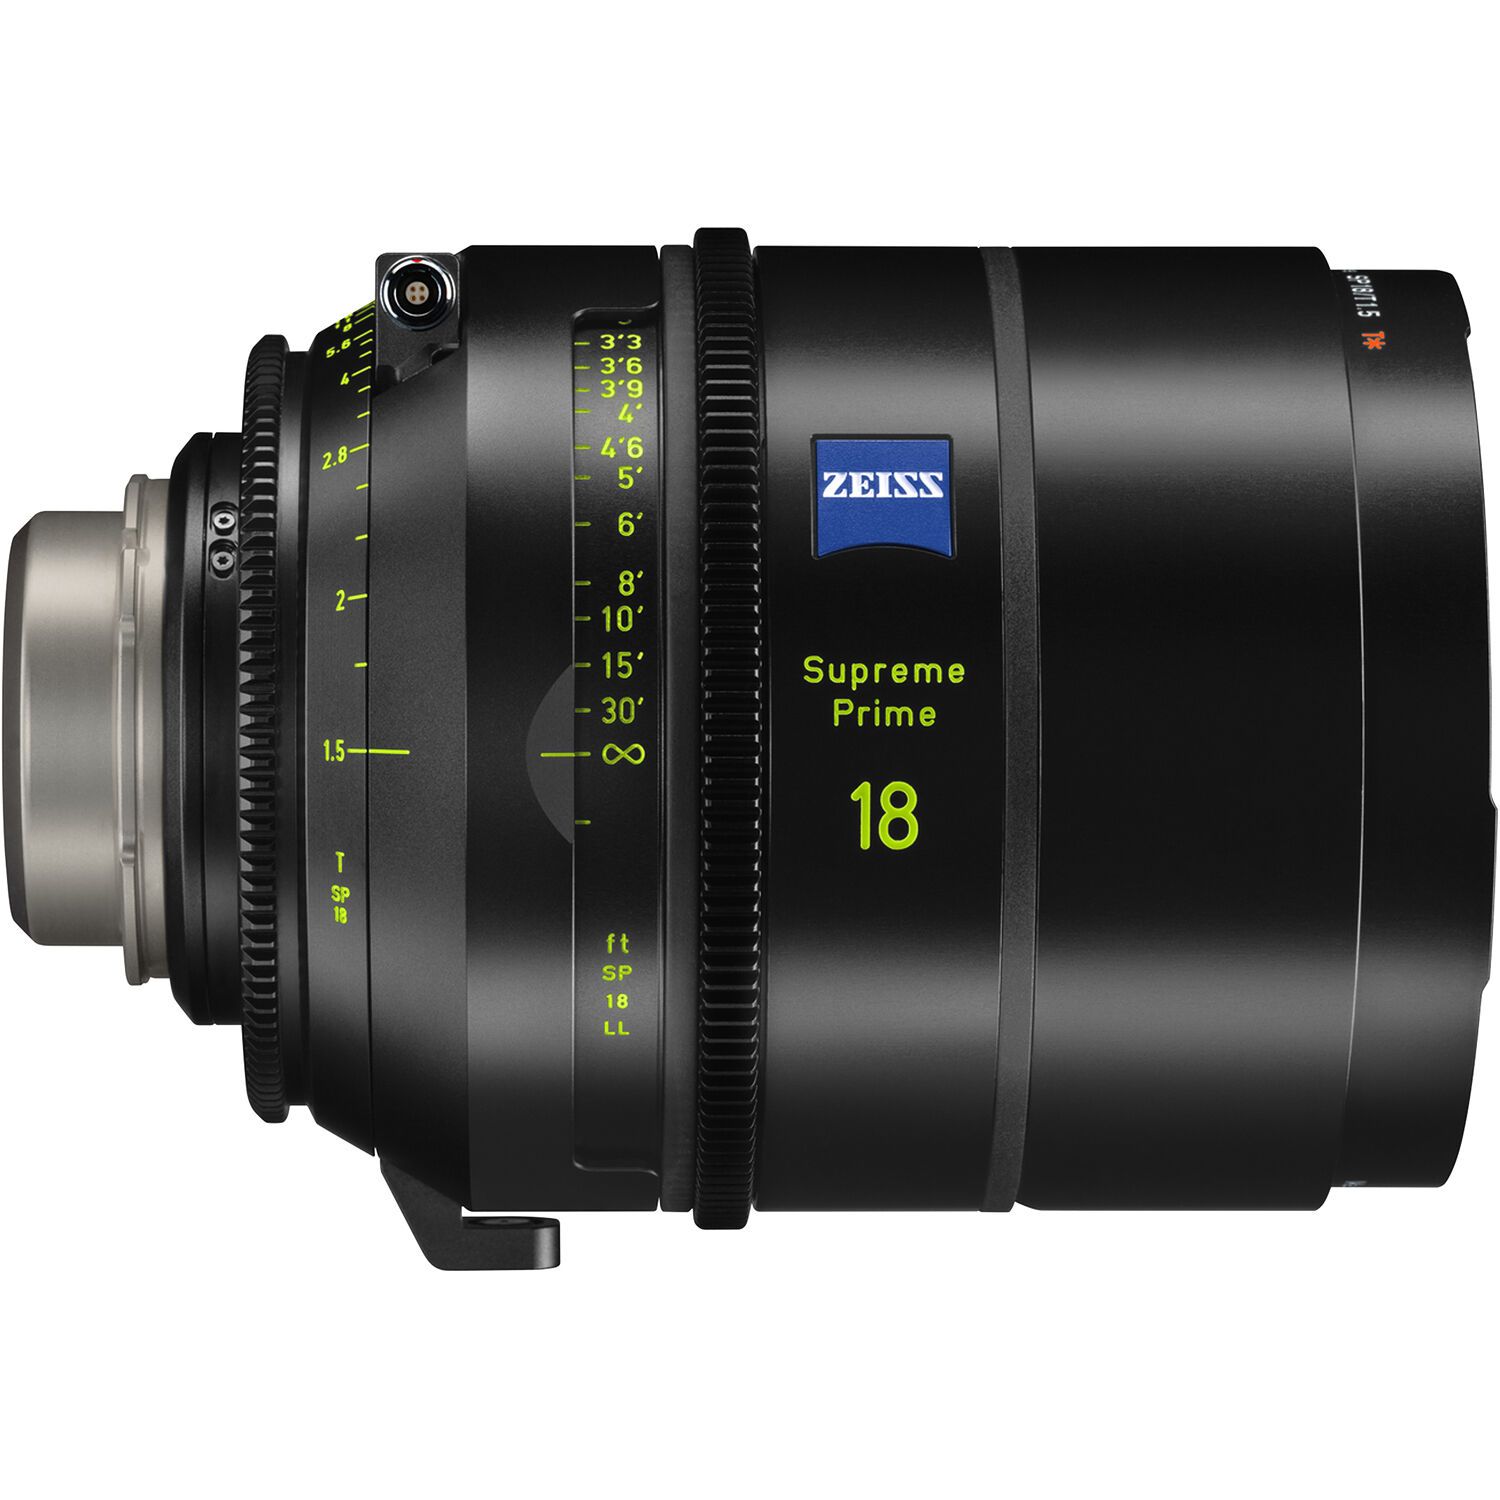 ZEISS - Supreme Prime 18mm T1.5 PL (Feet)